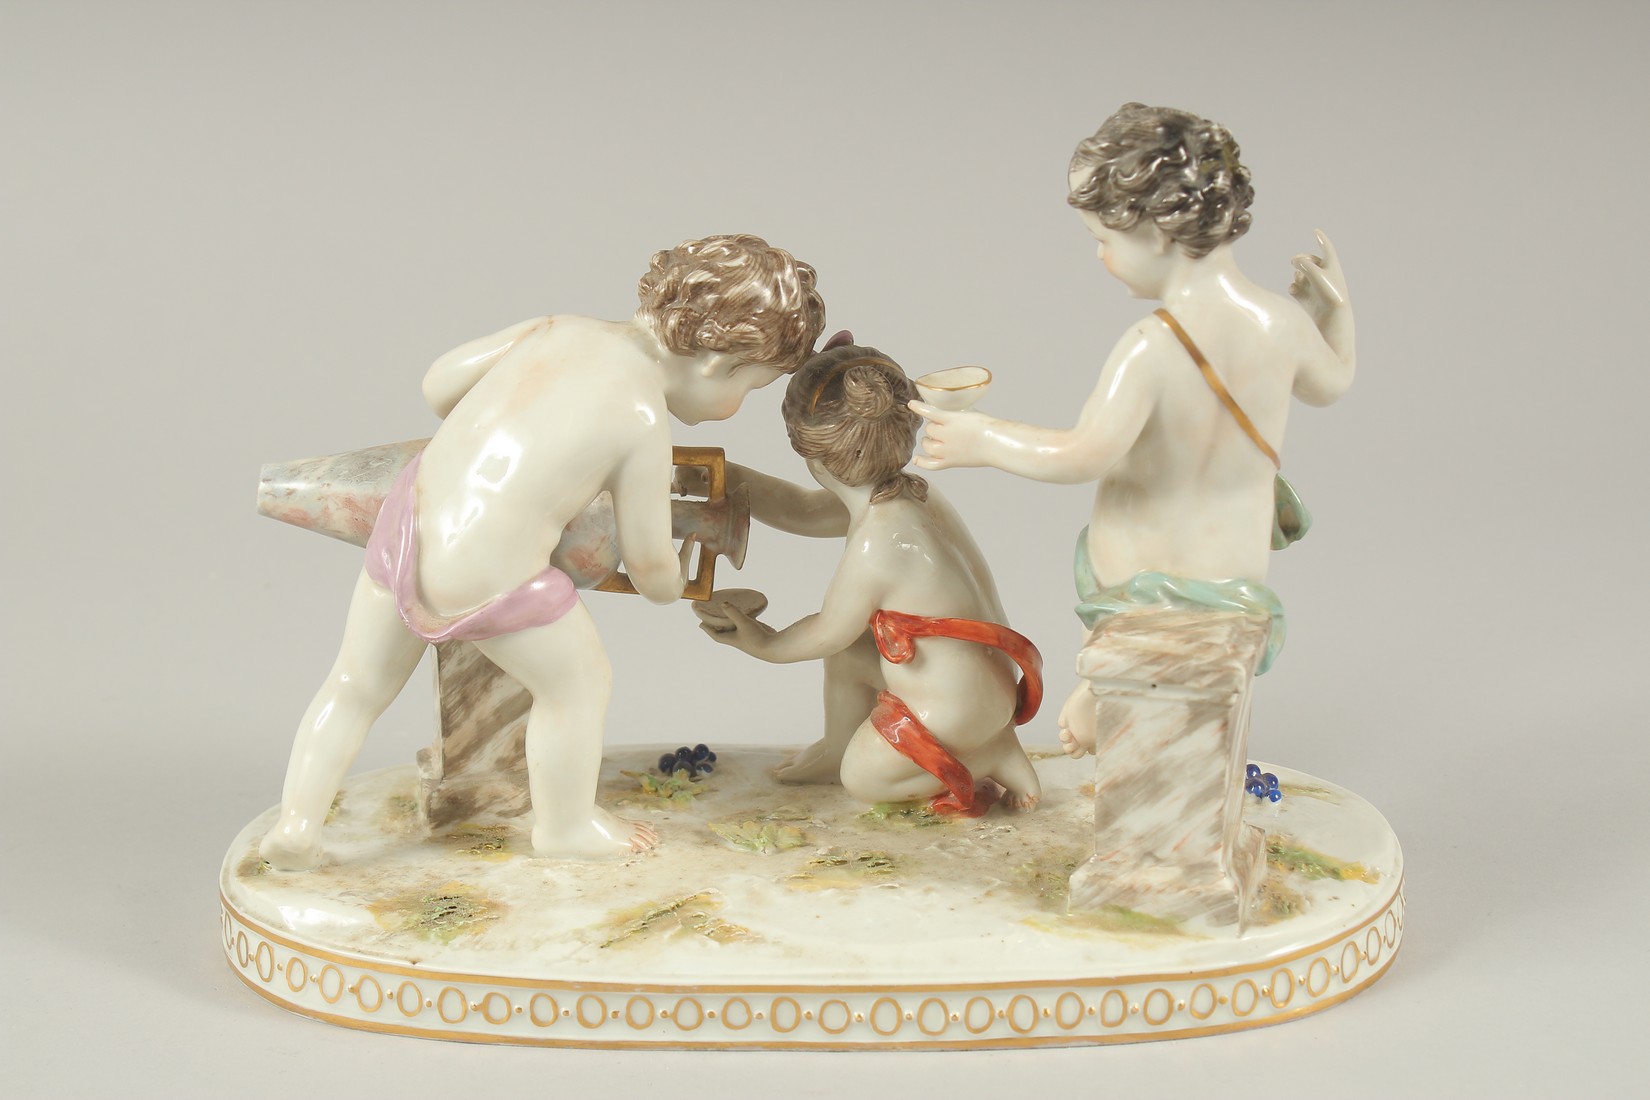 A GOOD PORCELAIN GROUP OF THREE CUPIDS, with a large urn and grapes. 9.5ins long. - Image 5 of 7